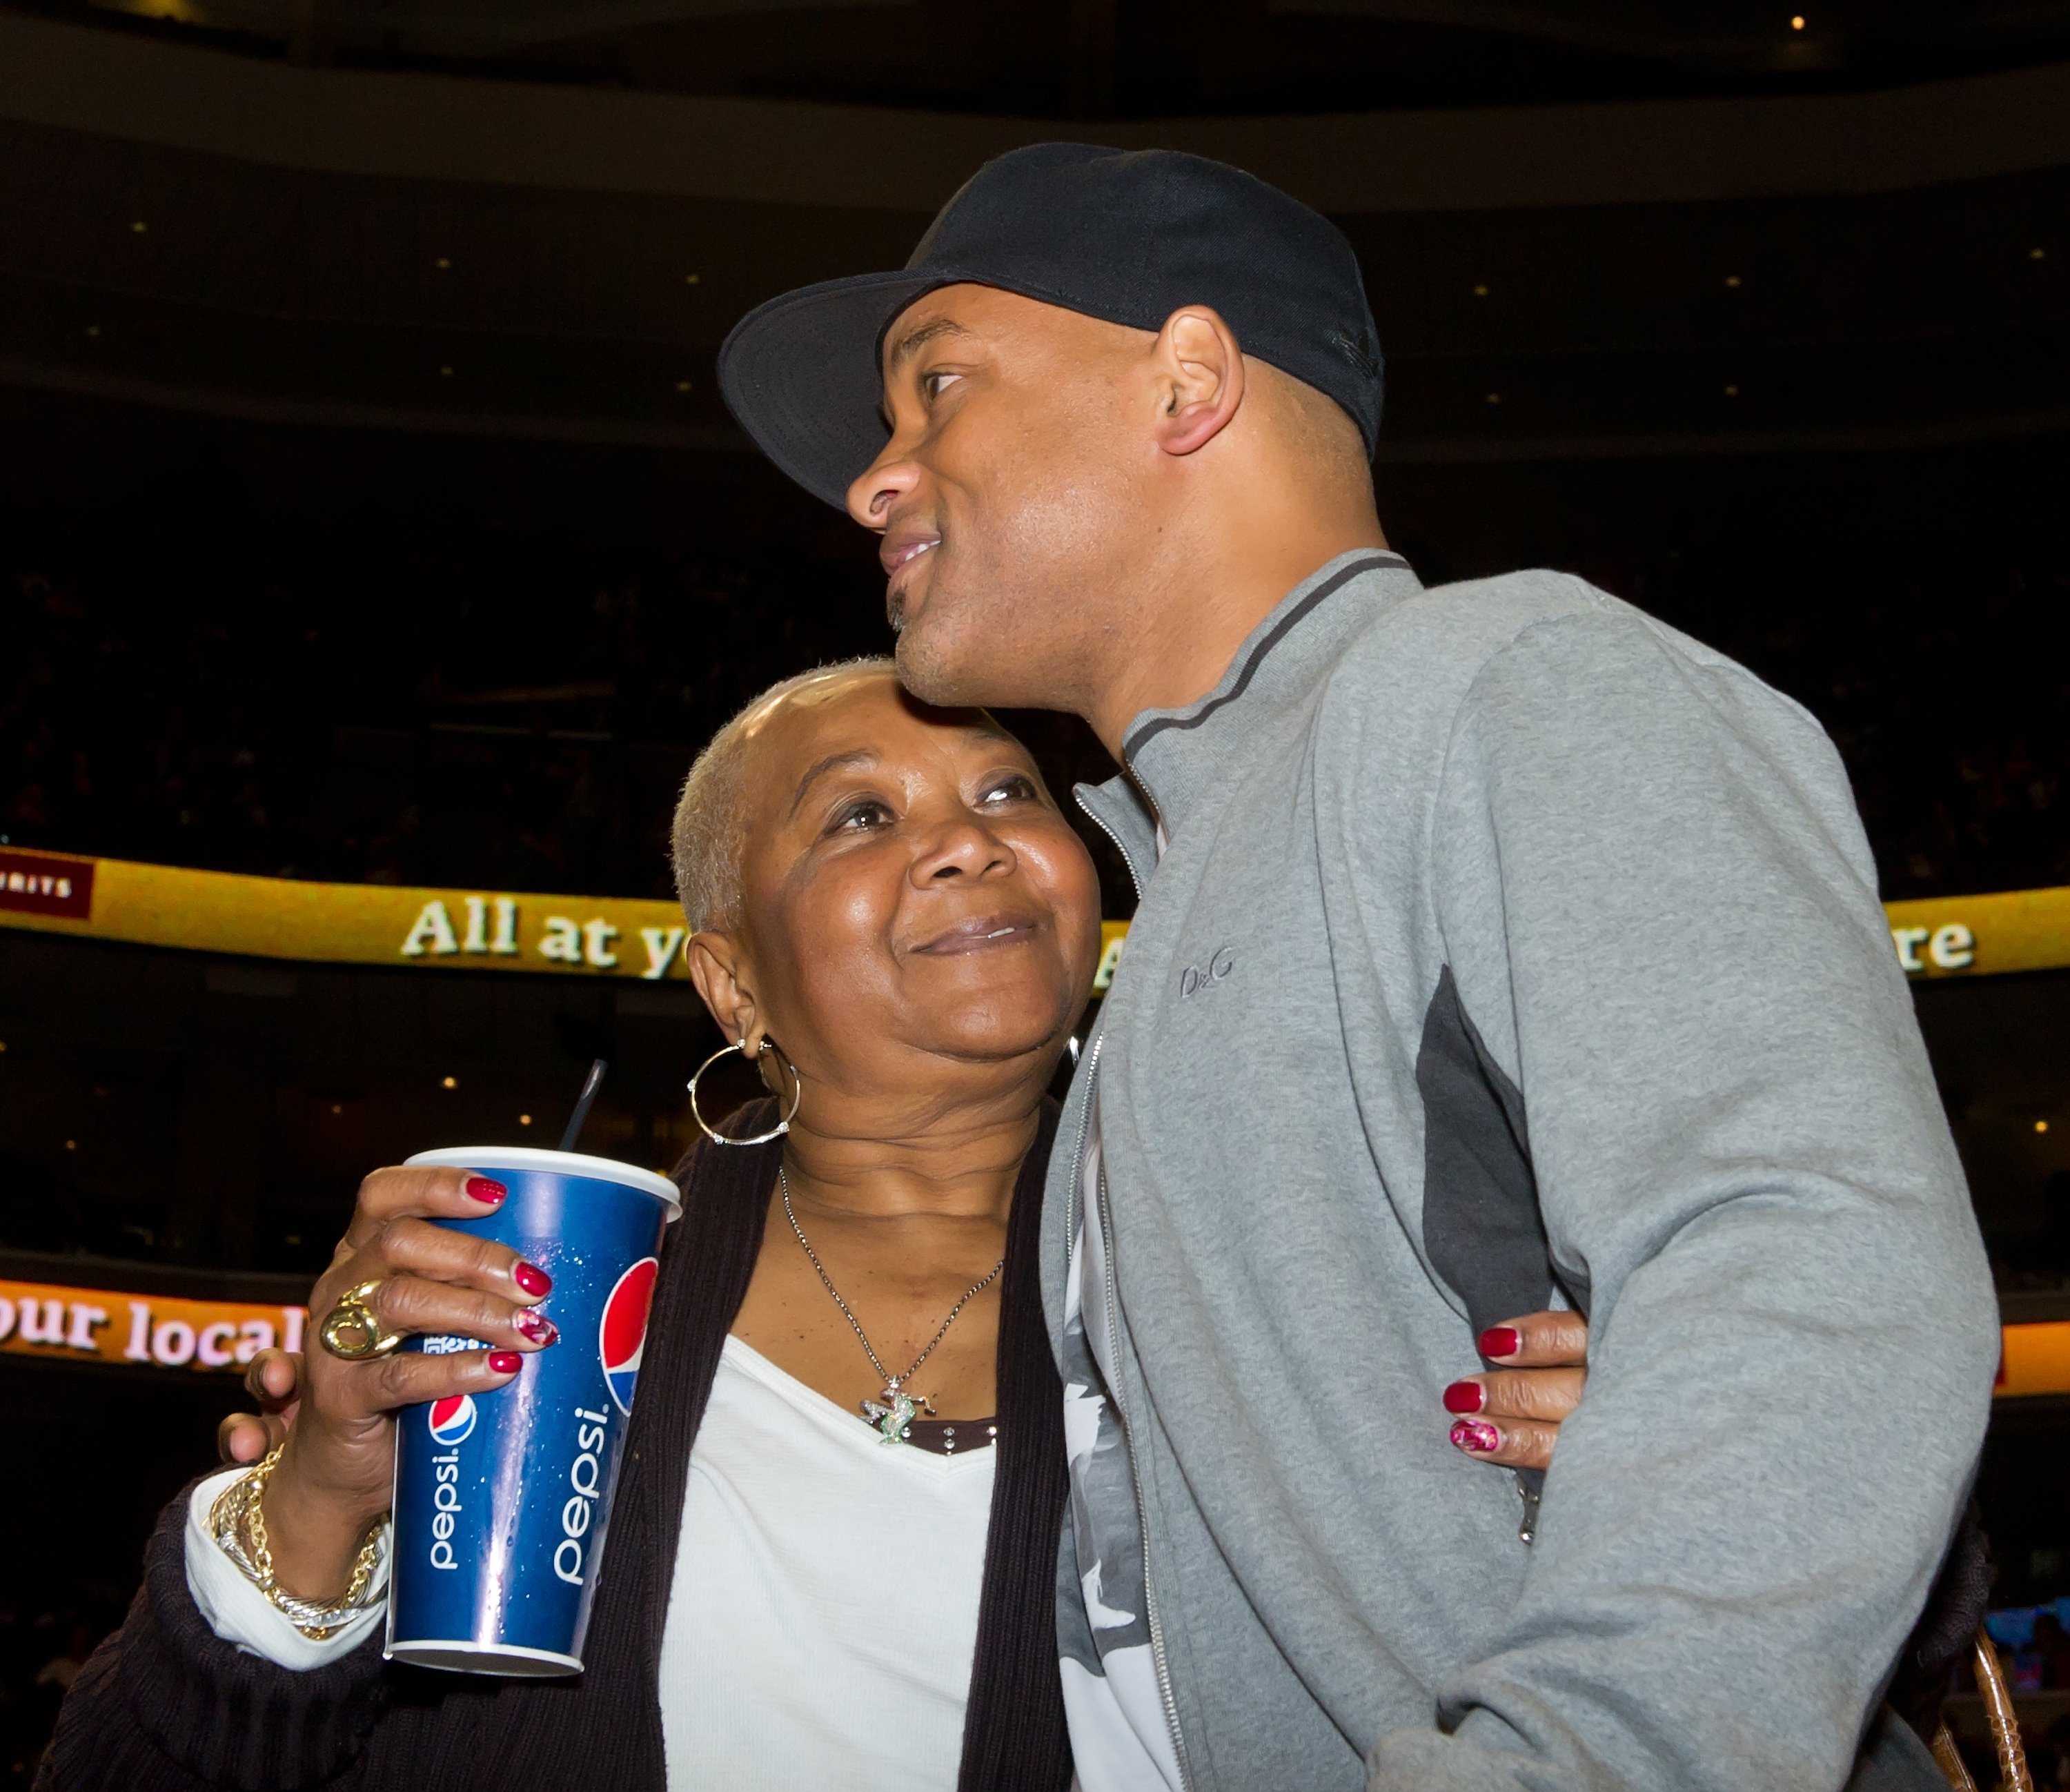 Carolyn and Will Smith at a game at Wachovia Center on March 16, 2012, in Philadelphia, Pennsylvania. | Source: Gilbert Carrasquillo/Getty Images